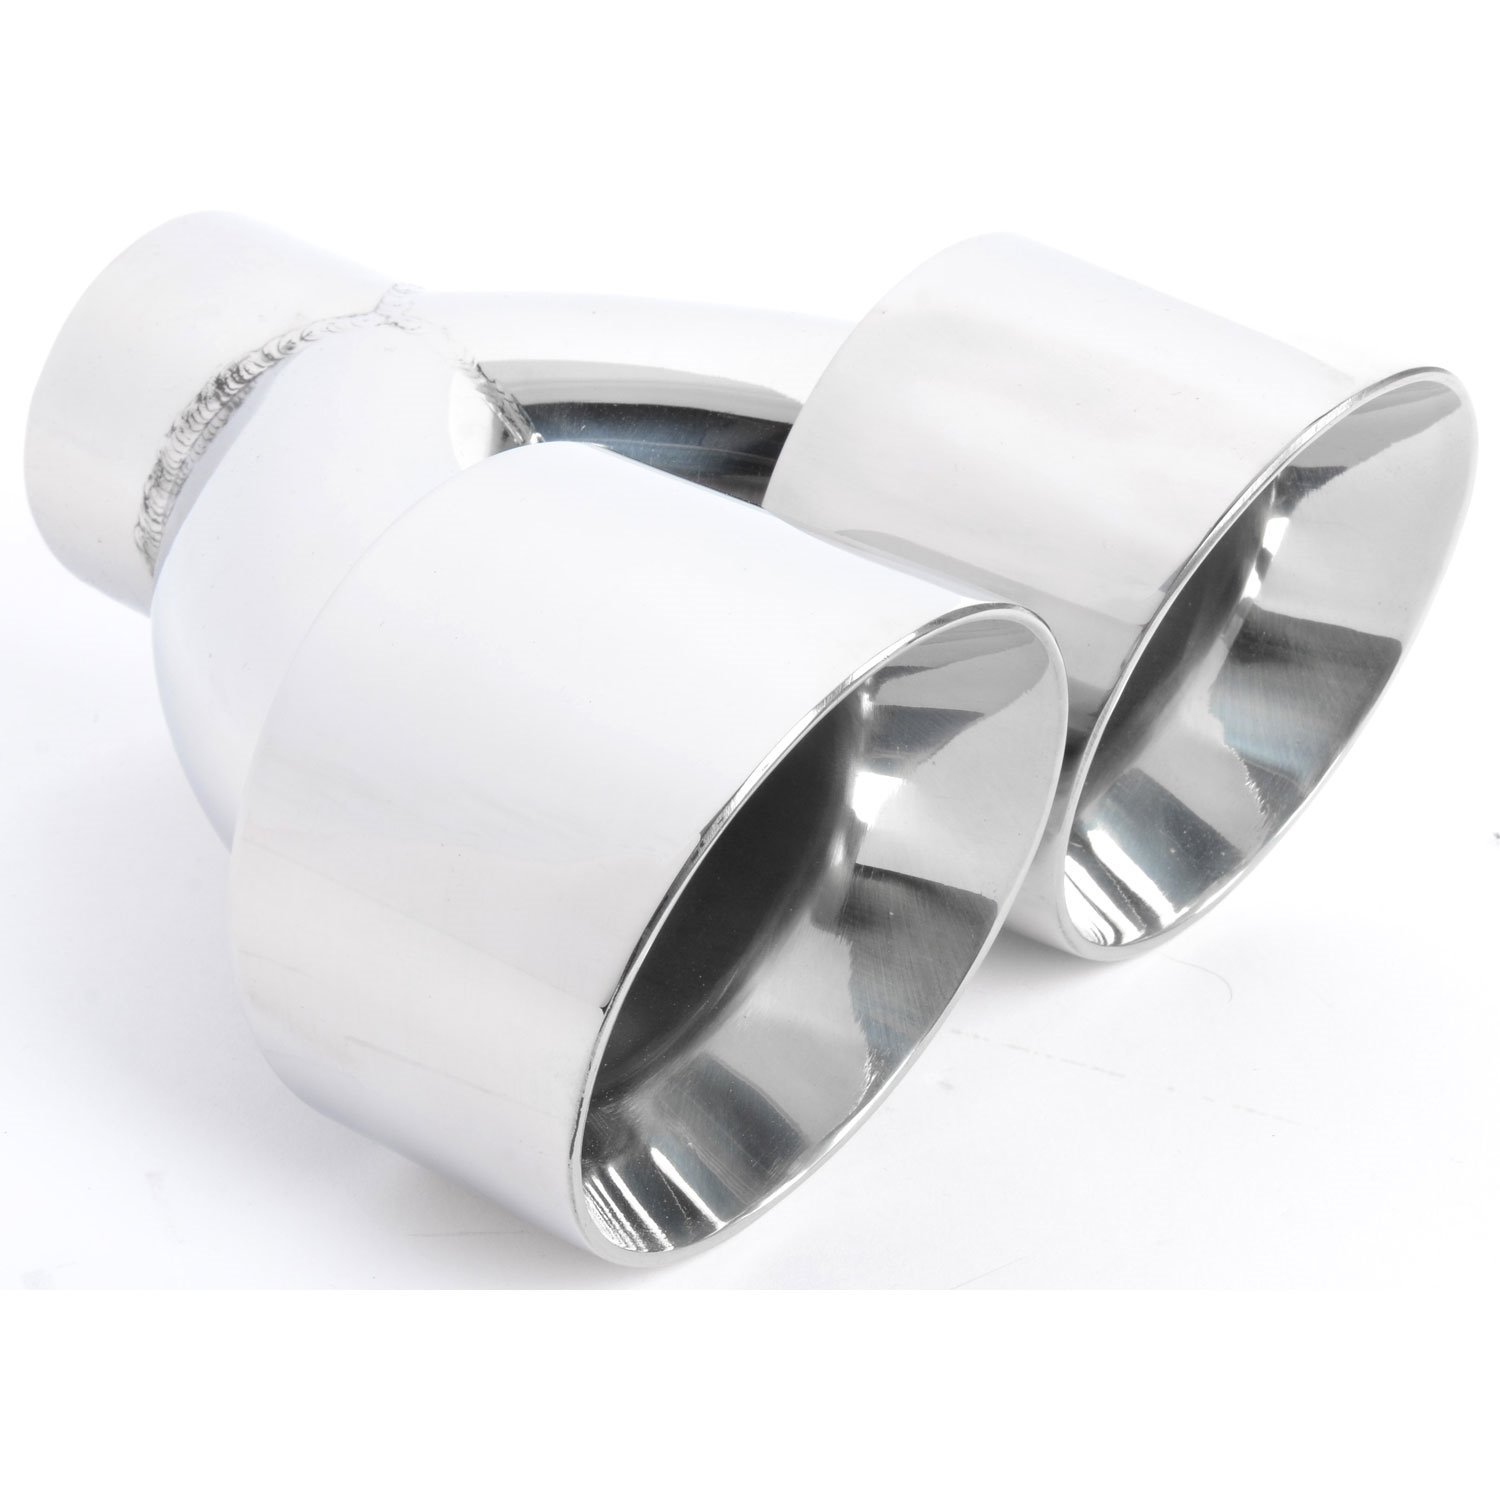 Stainless Dual Exhaust Tip Overall Length: 7 7/8 in. Weld-On